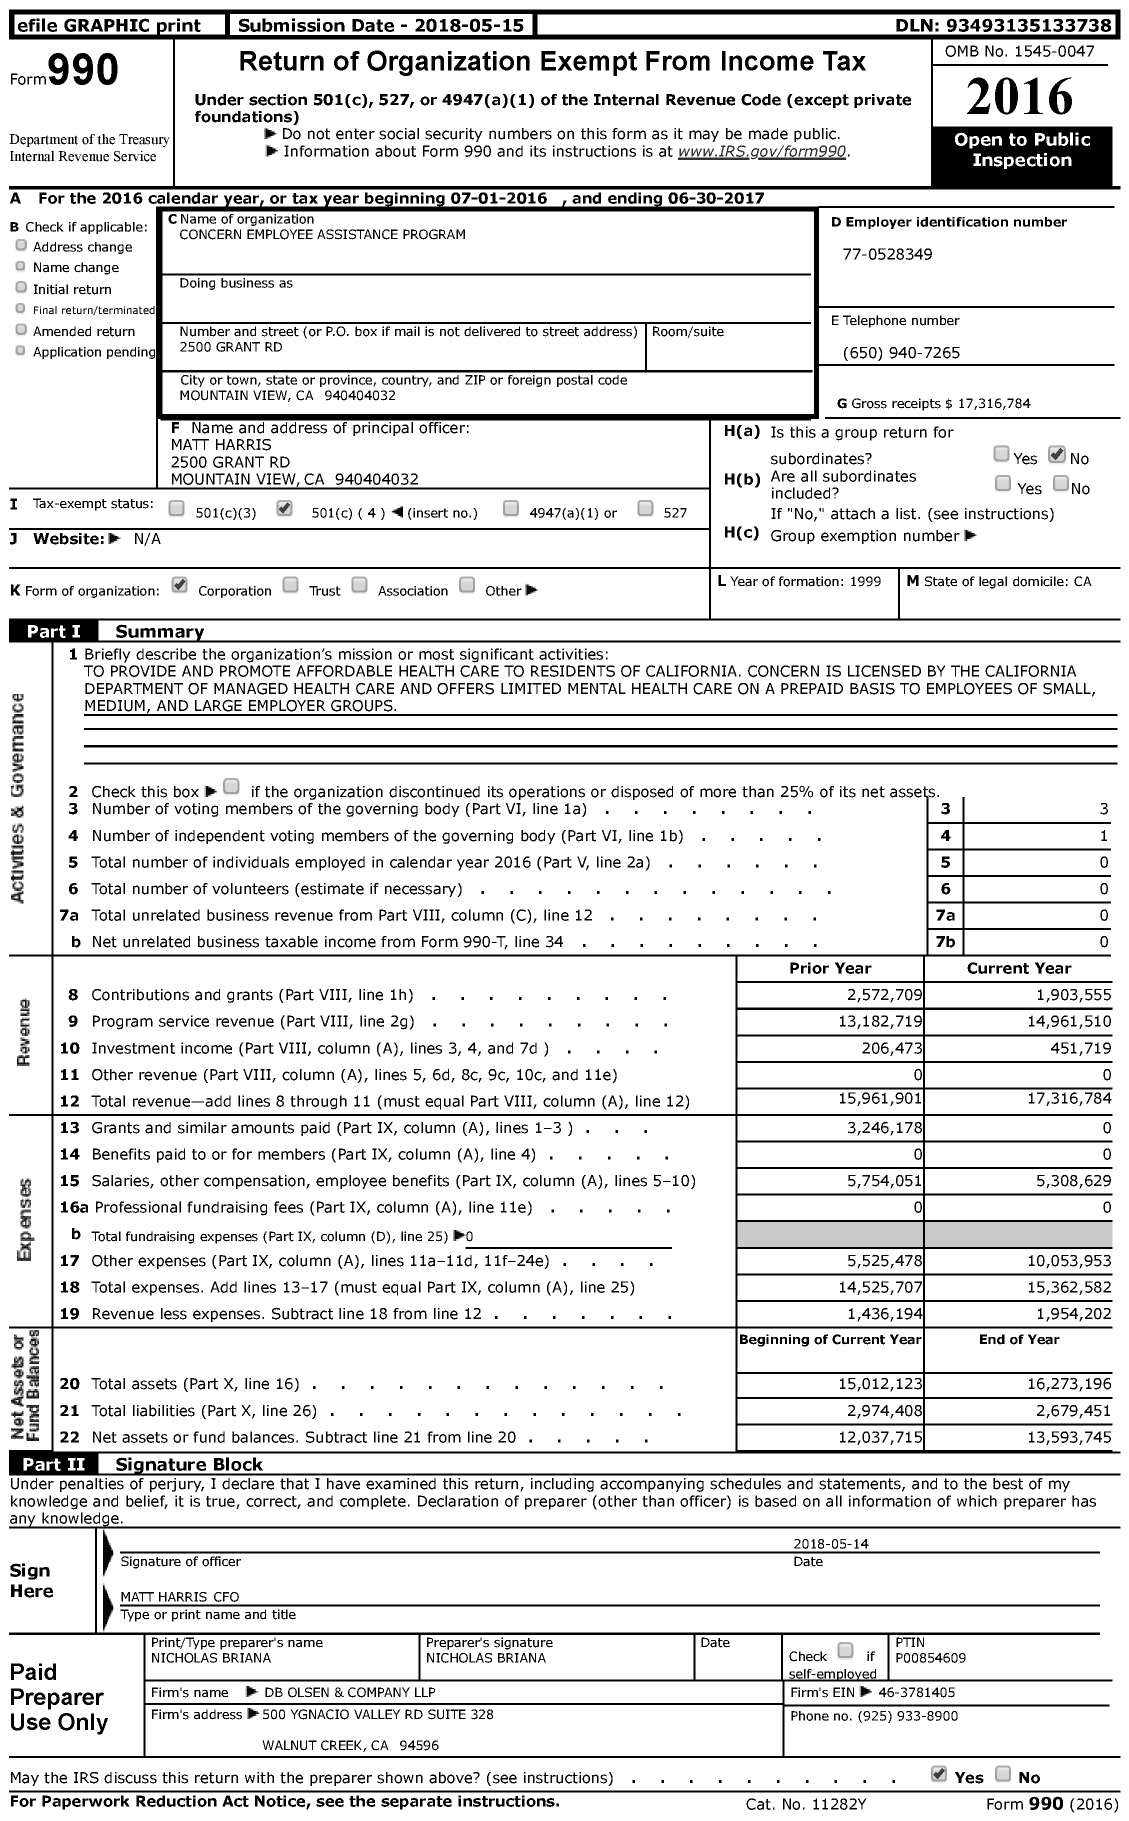 Image of first page of 2016 Form 990 for Concern Employee Assistance Program